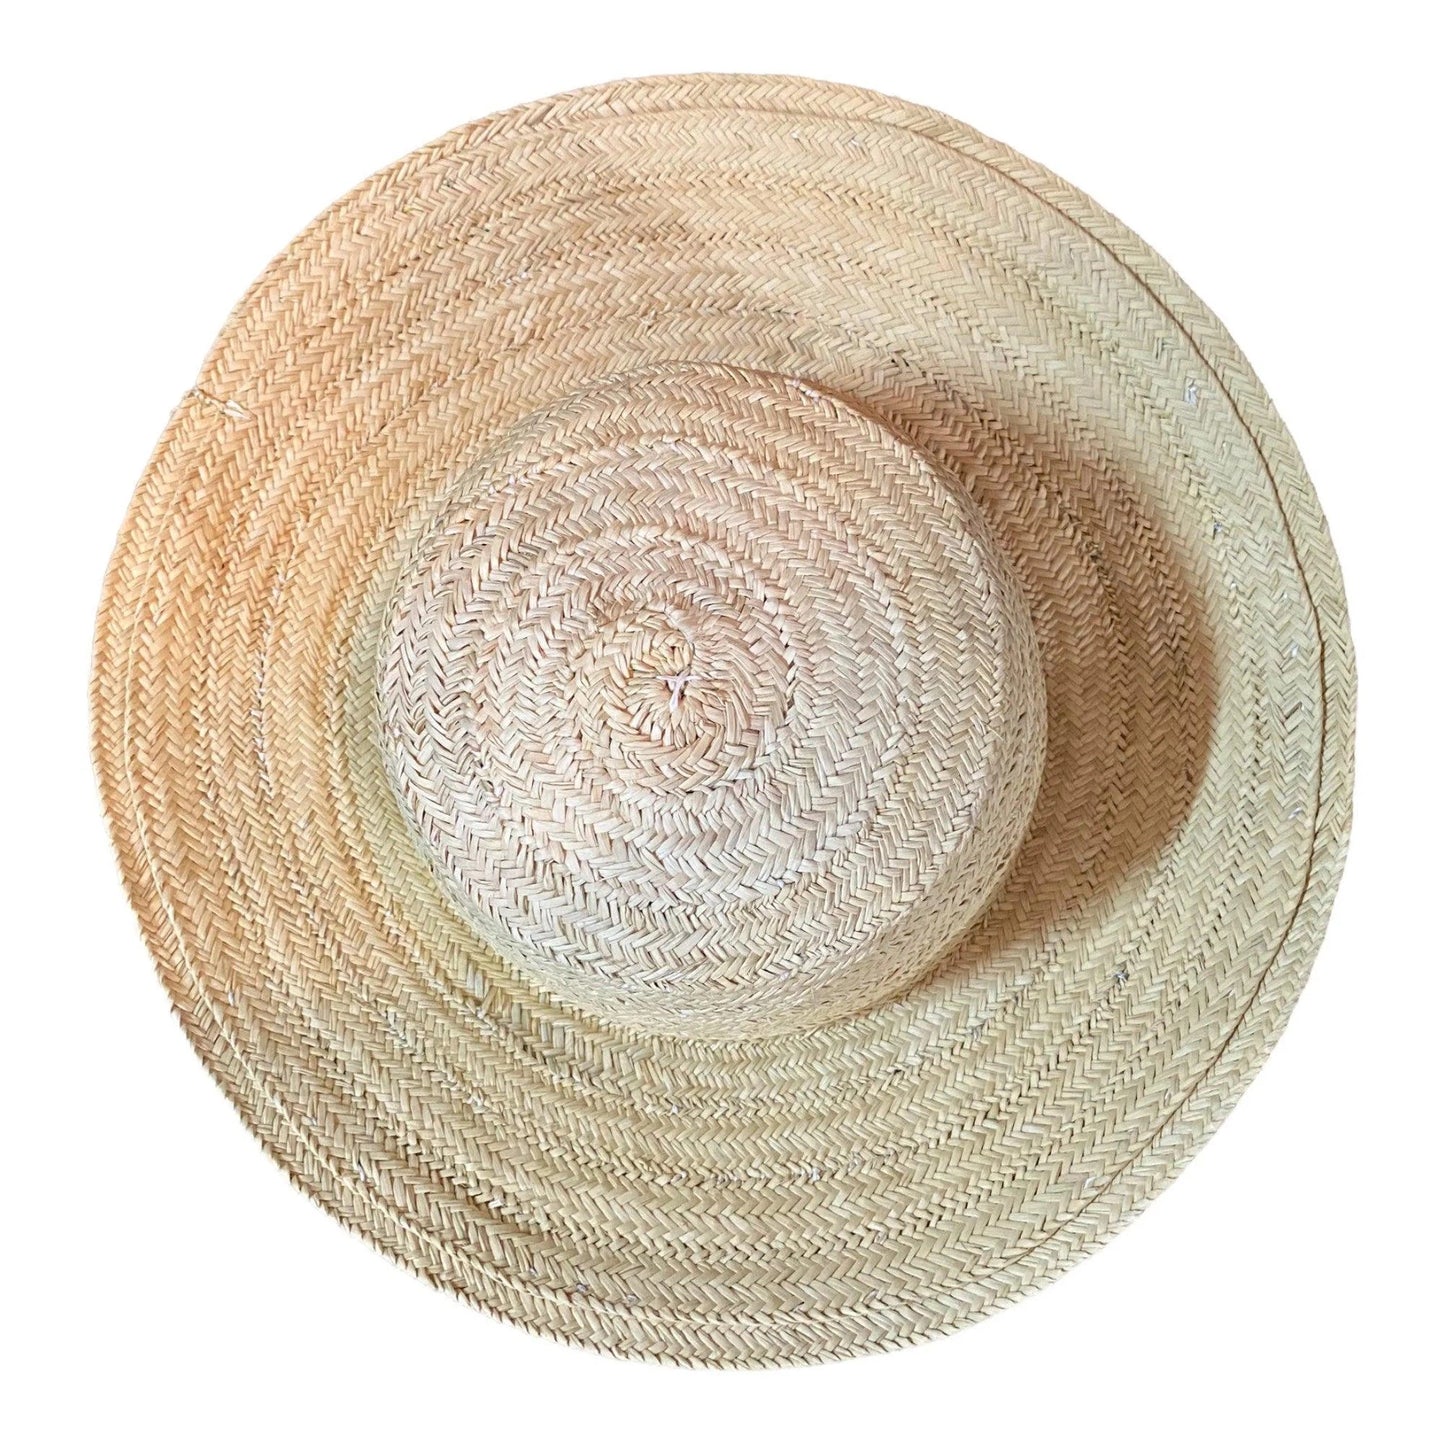 a close up of a hat on a hat 